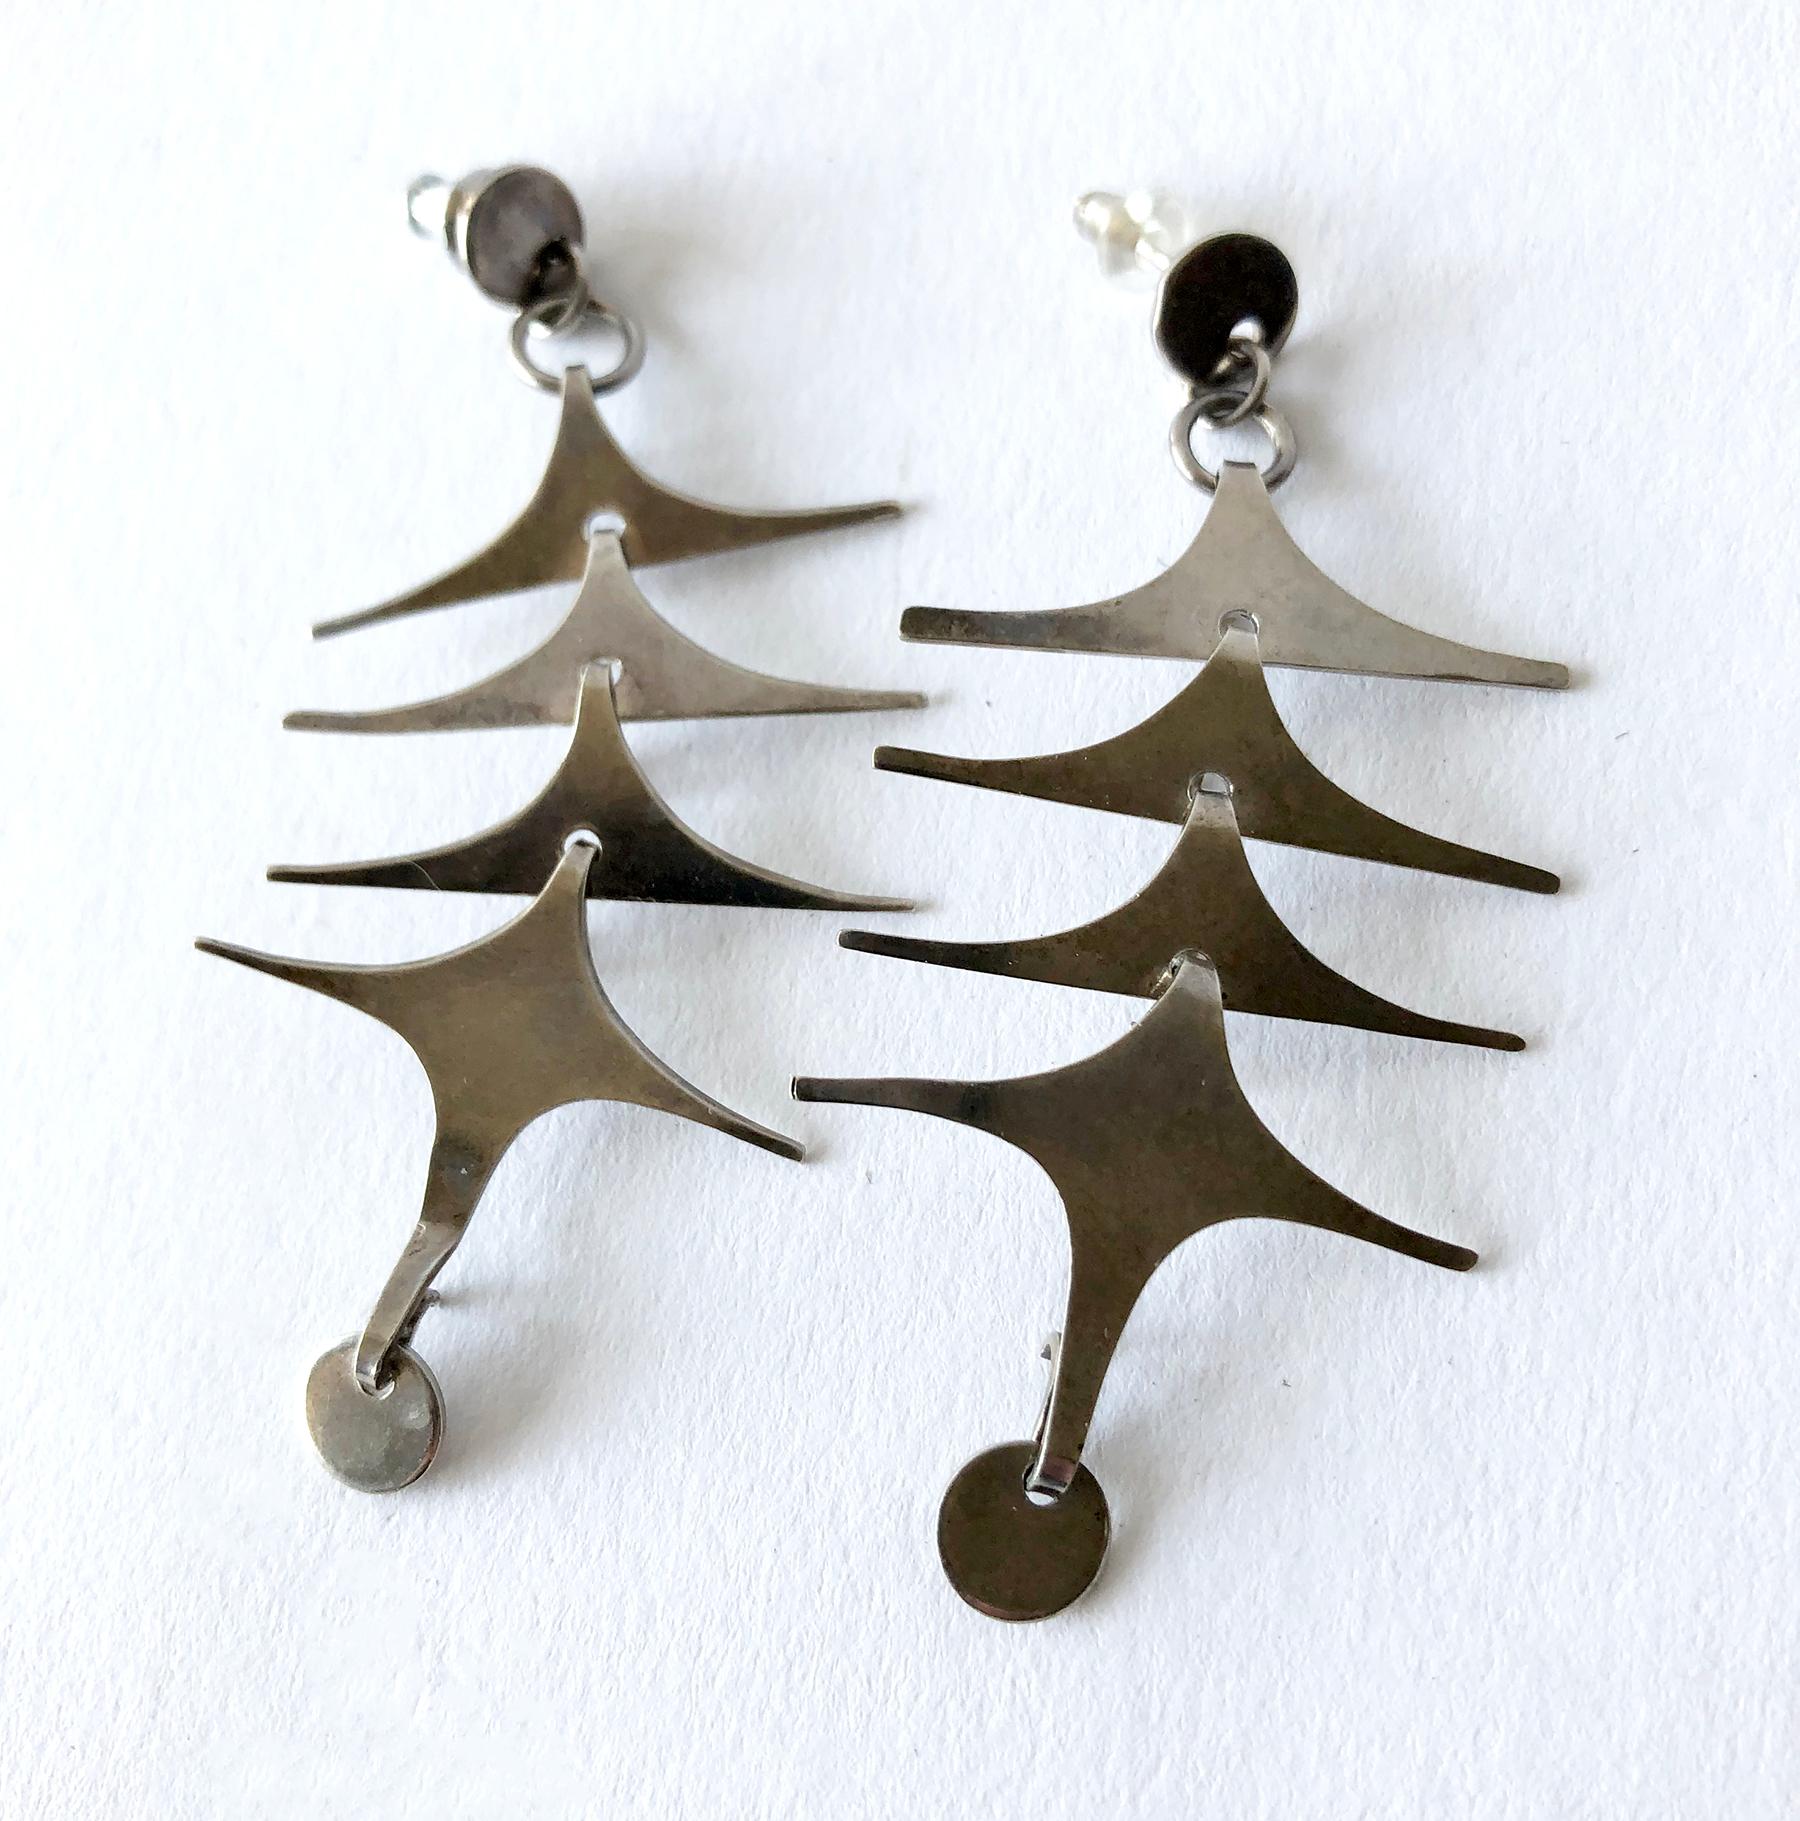 Handmade, articulating sterling silver earrings by Mary Ann Scherr of North Carolina.  Pierced earrings measure about 2 1/2